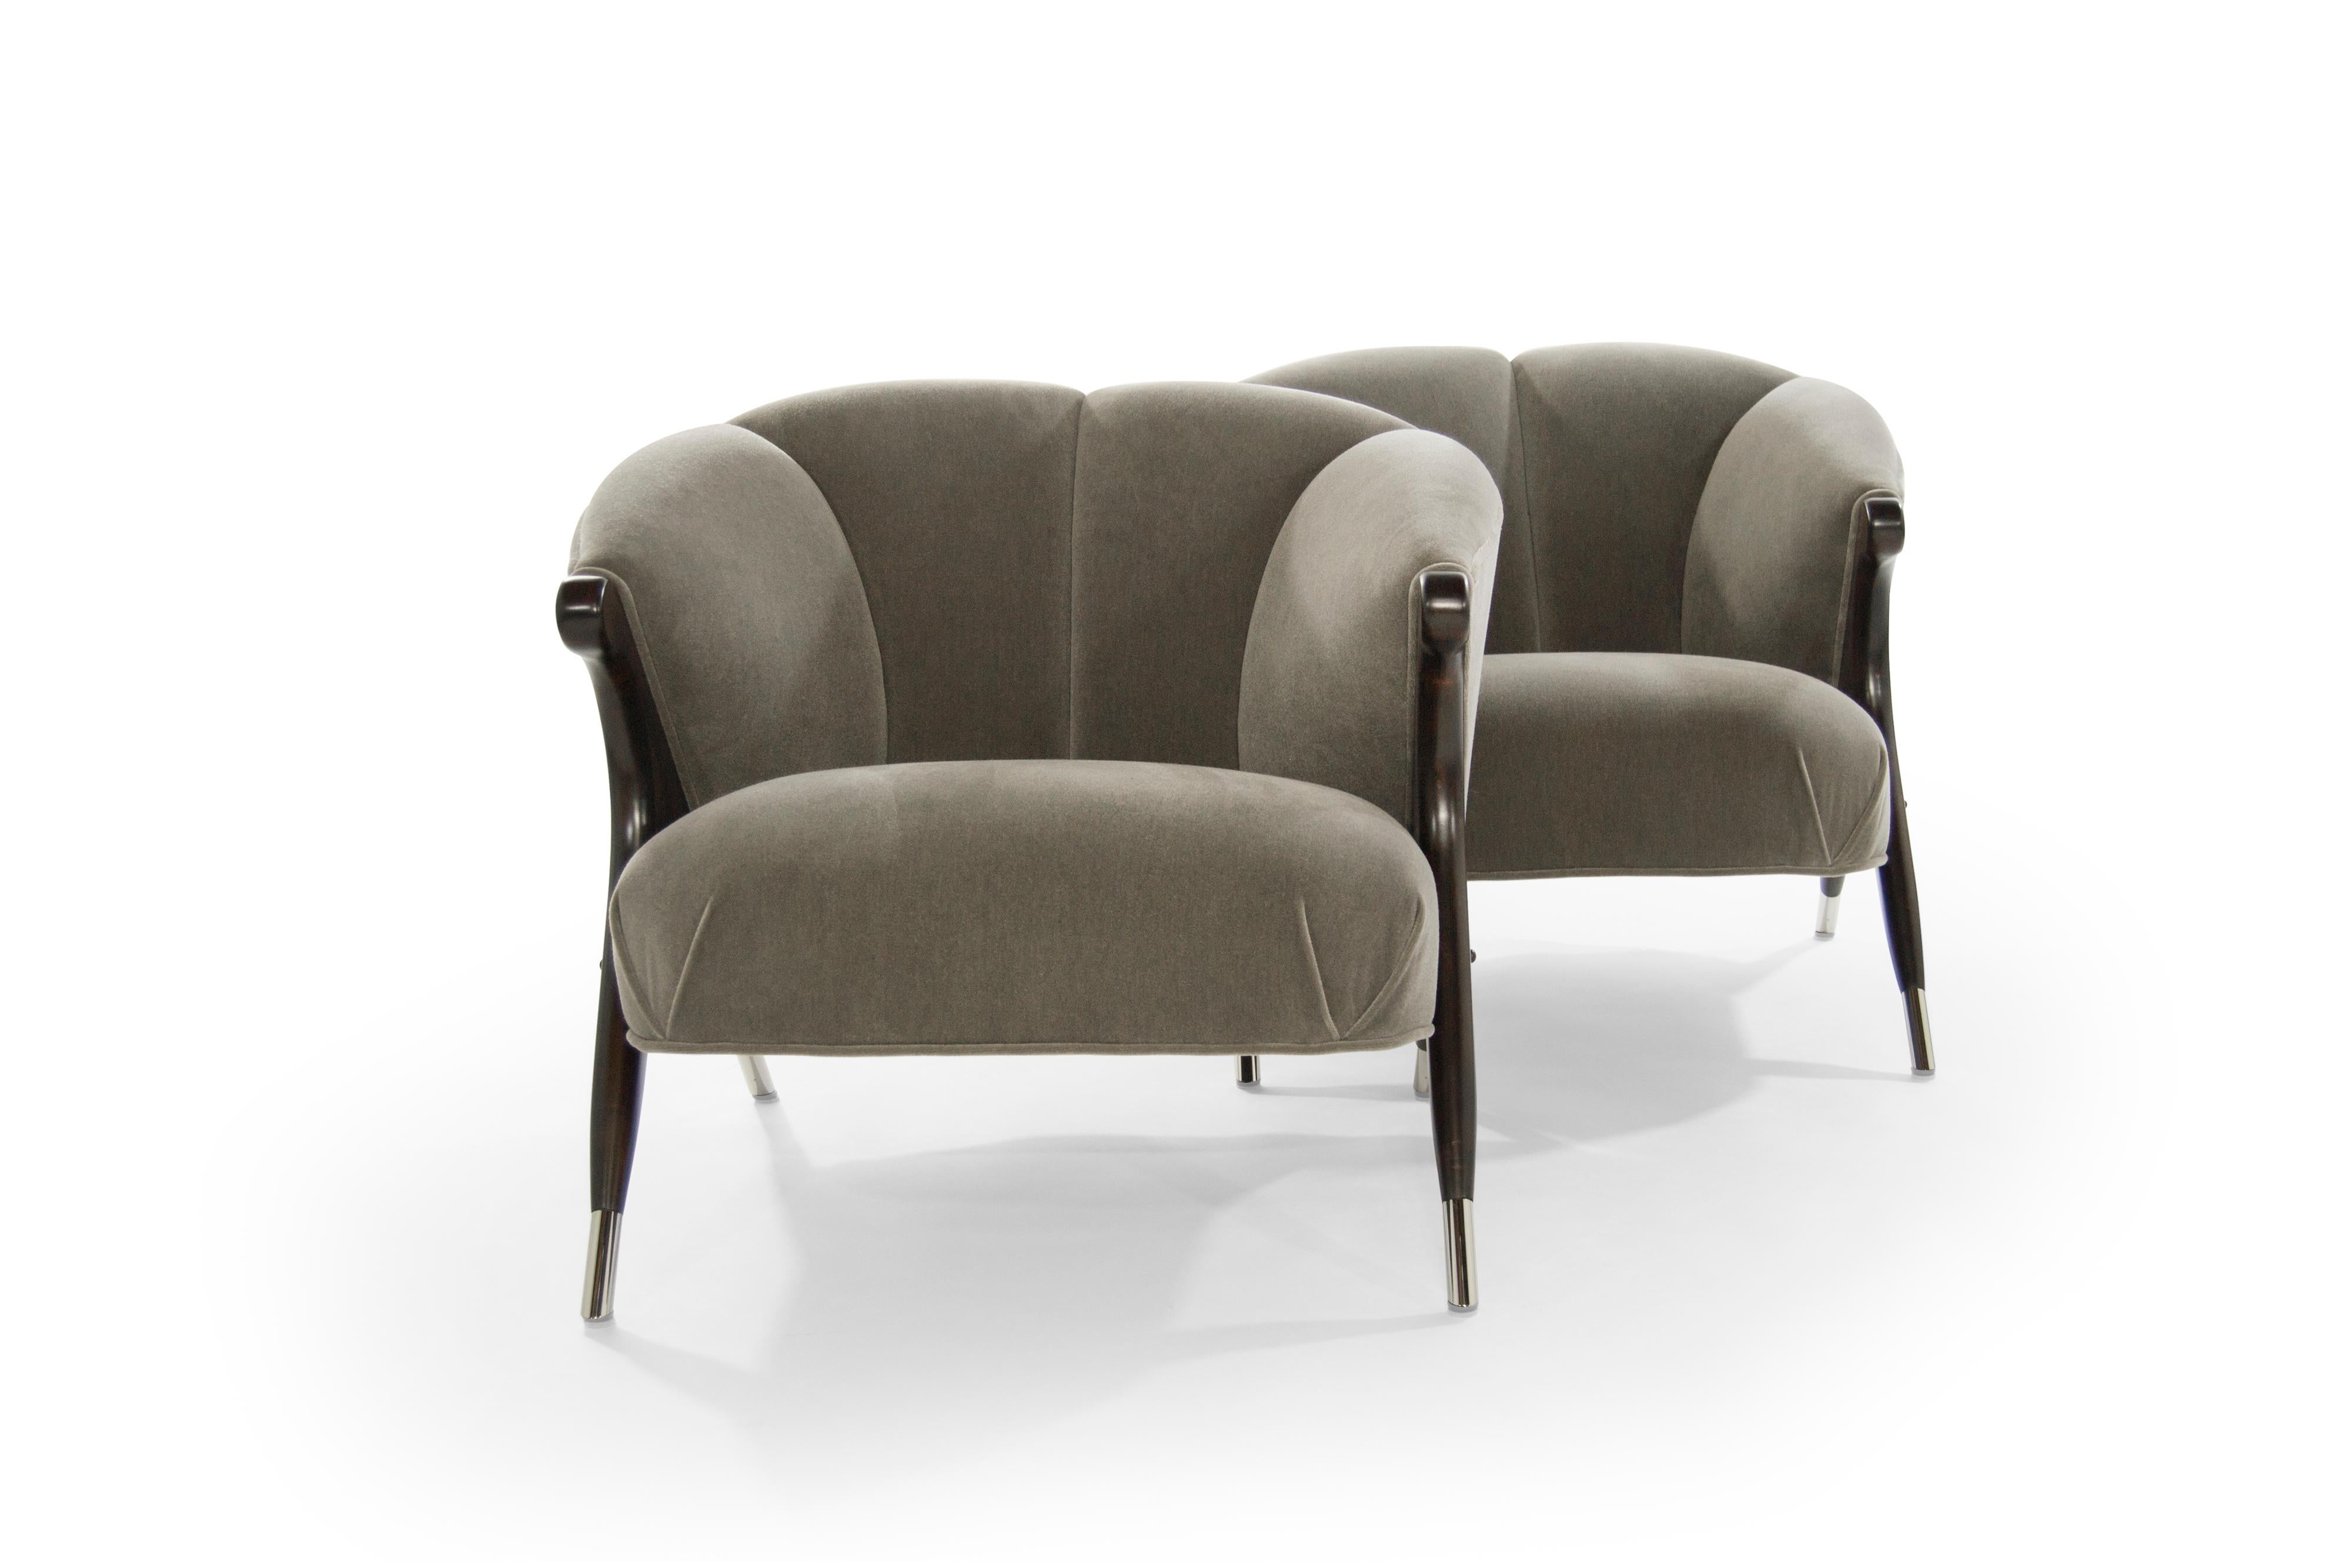 Brass Modernist Karpen Lounge Chairs in Charcoal Mohair, 1950s